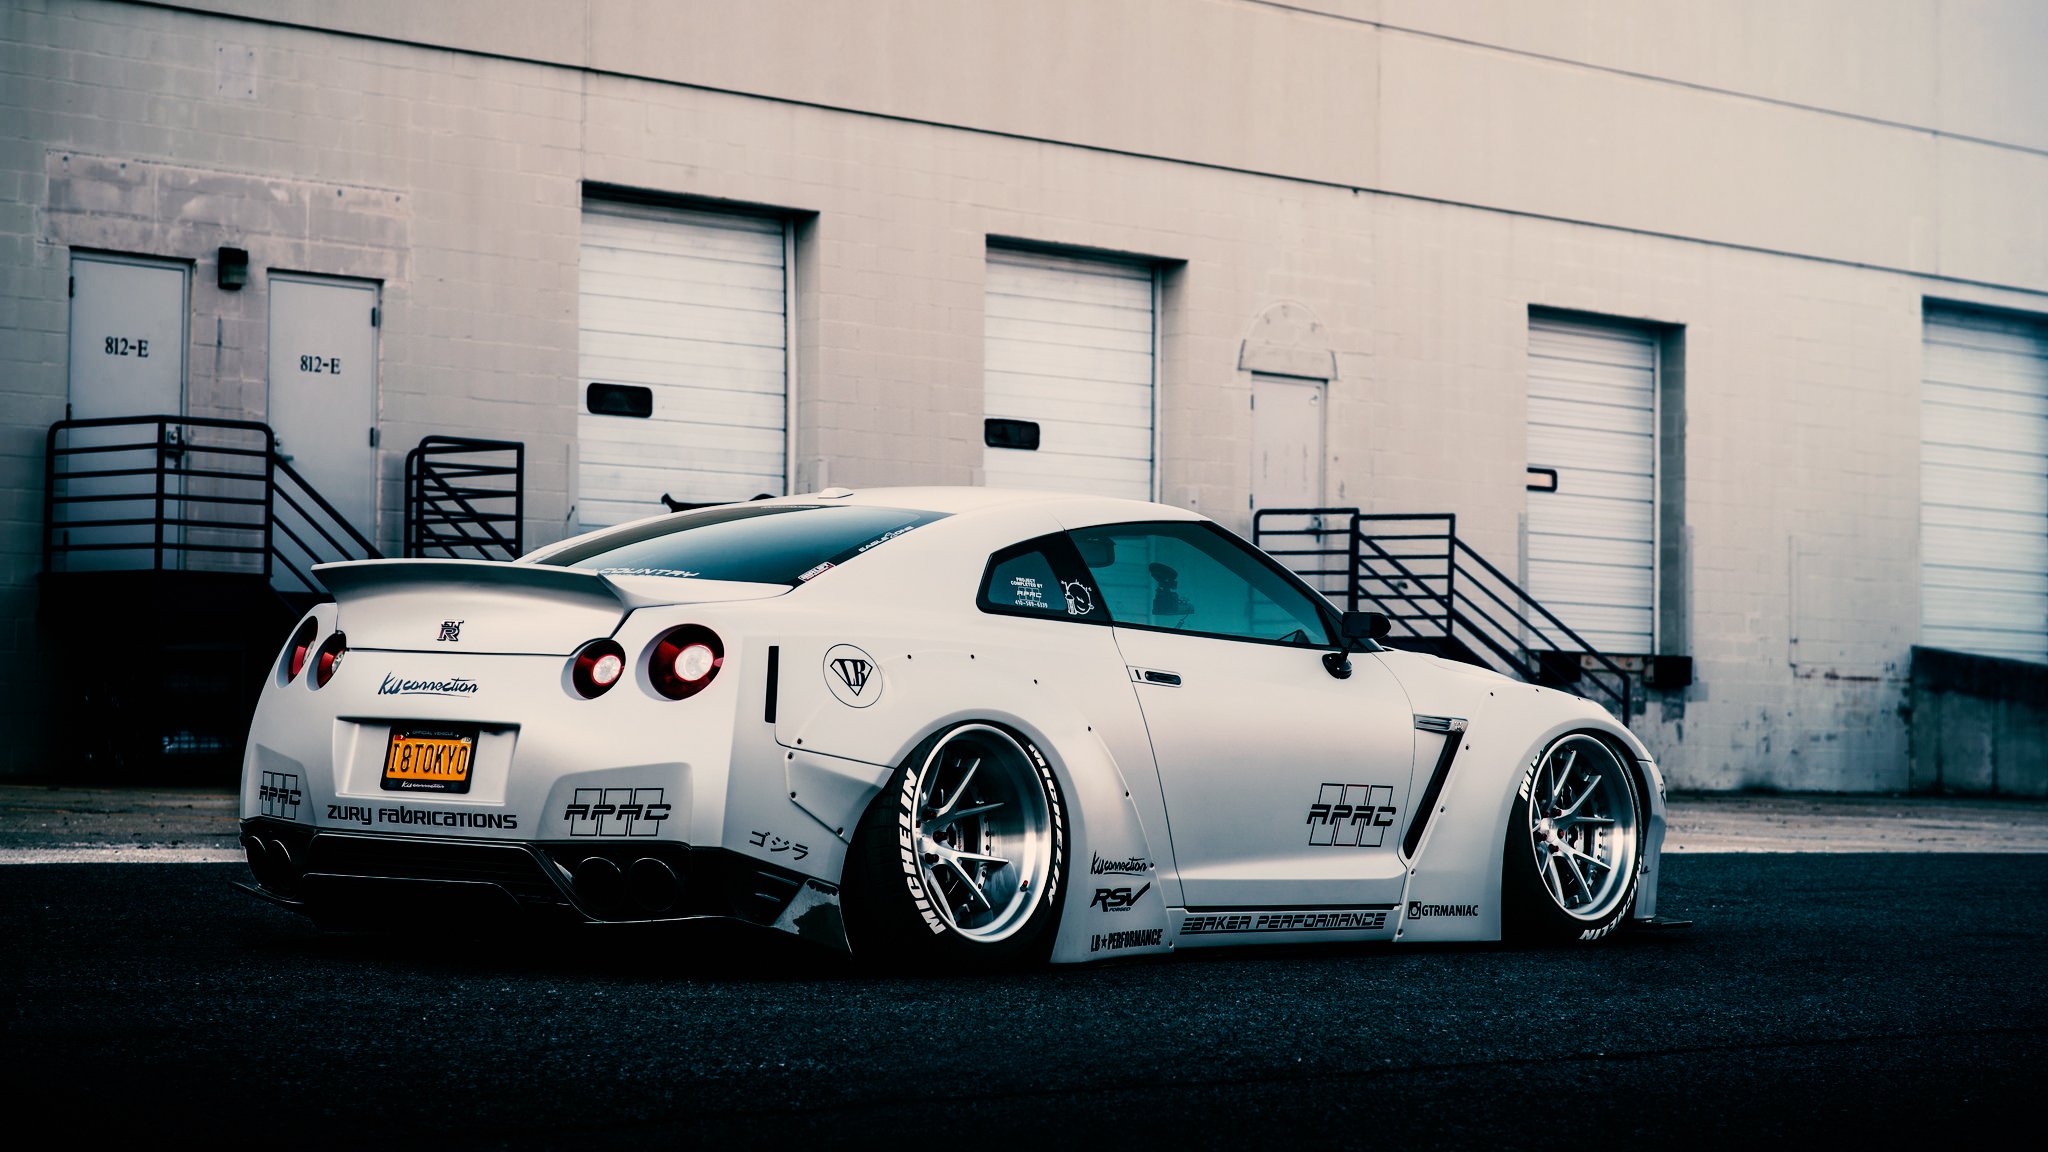 This is actually a short article or even graphic around the Nissan 350z кар...